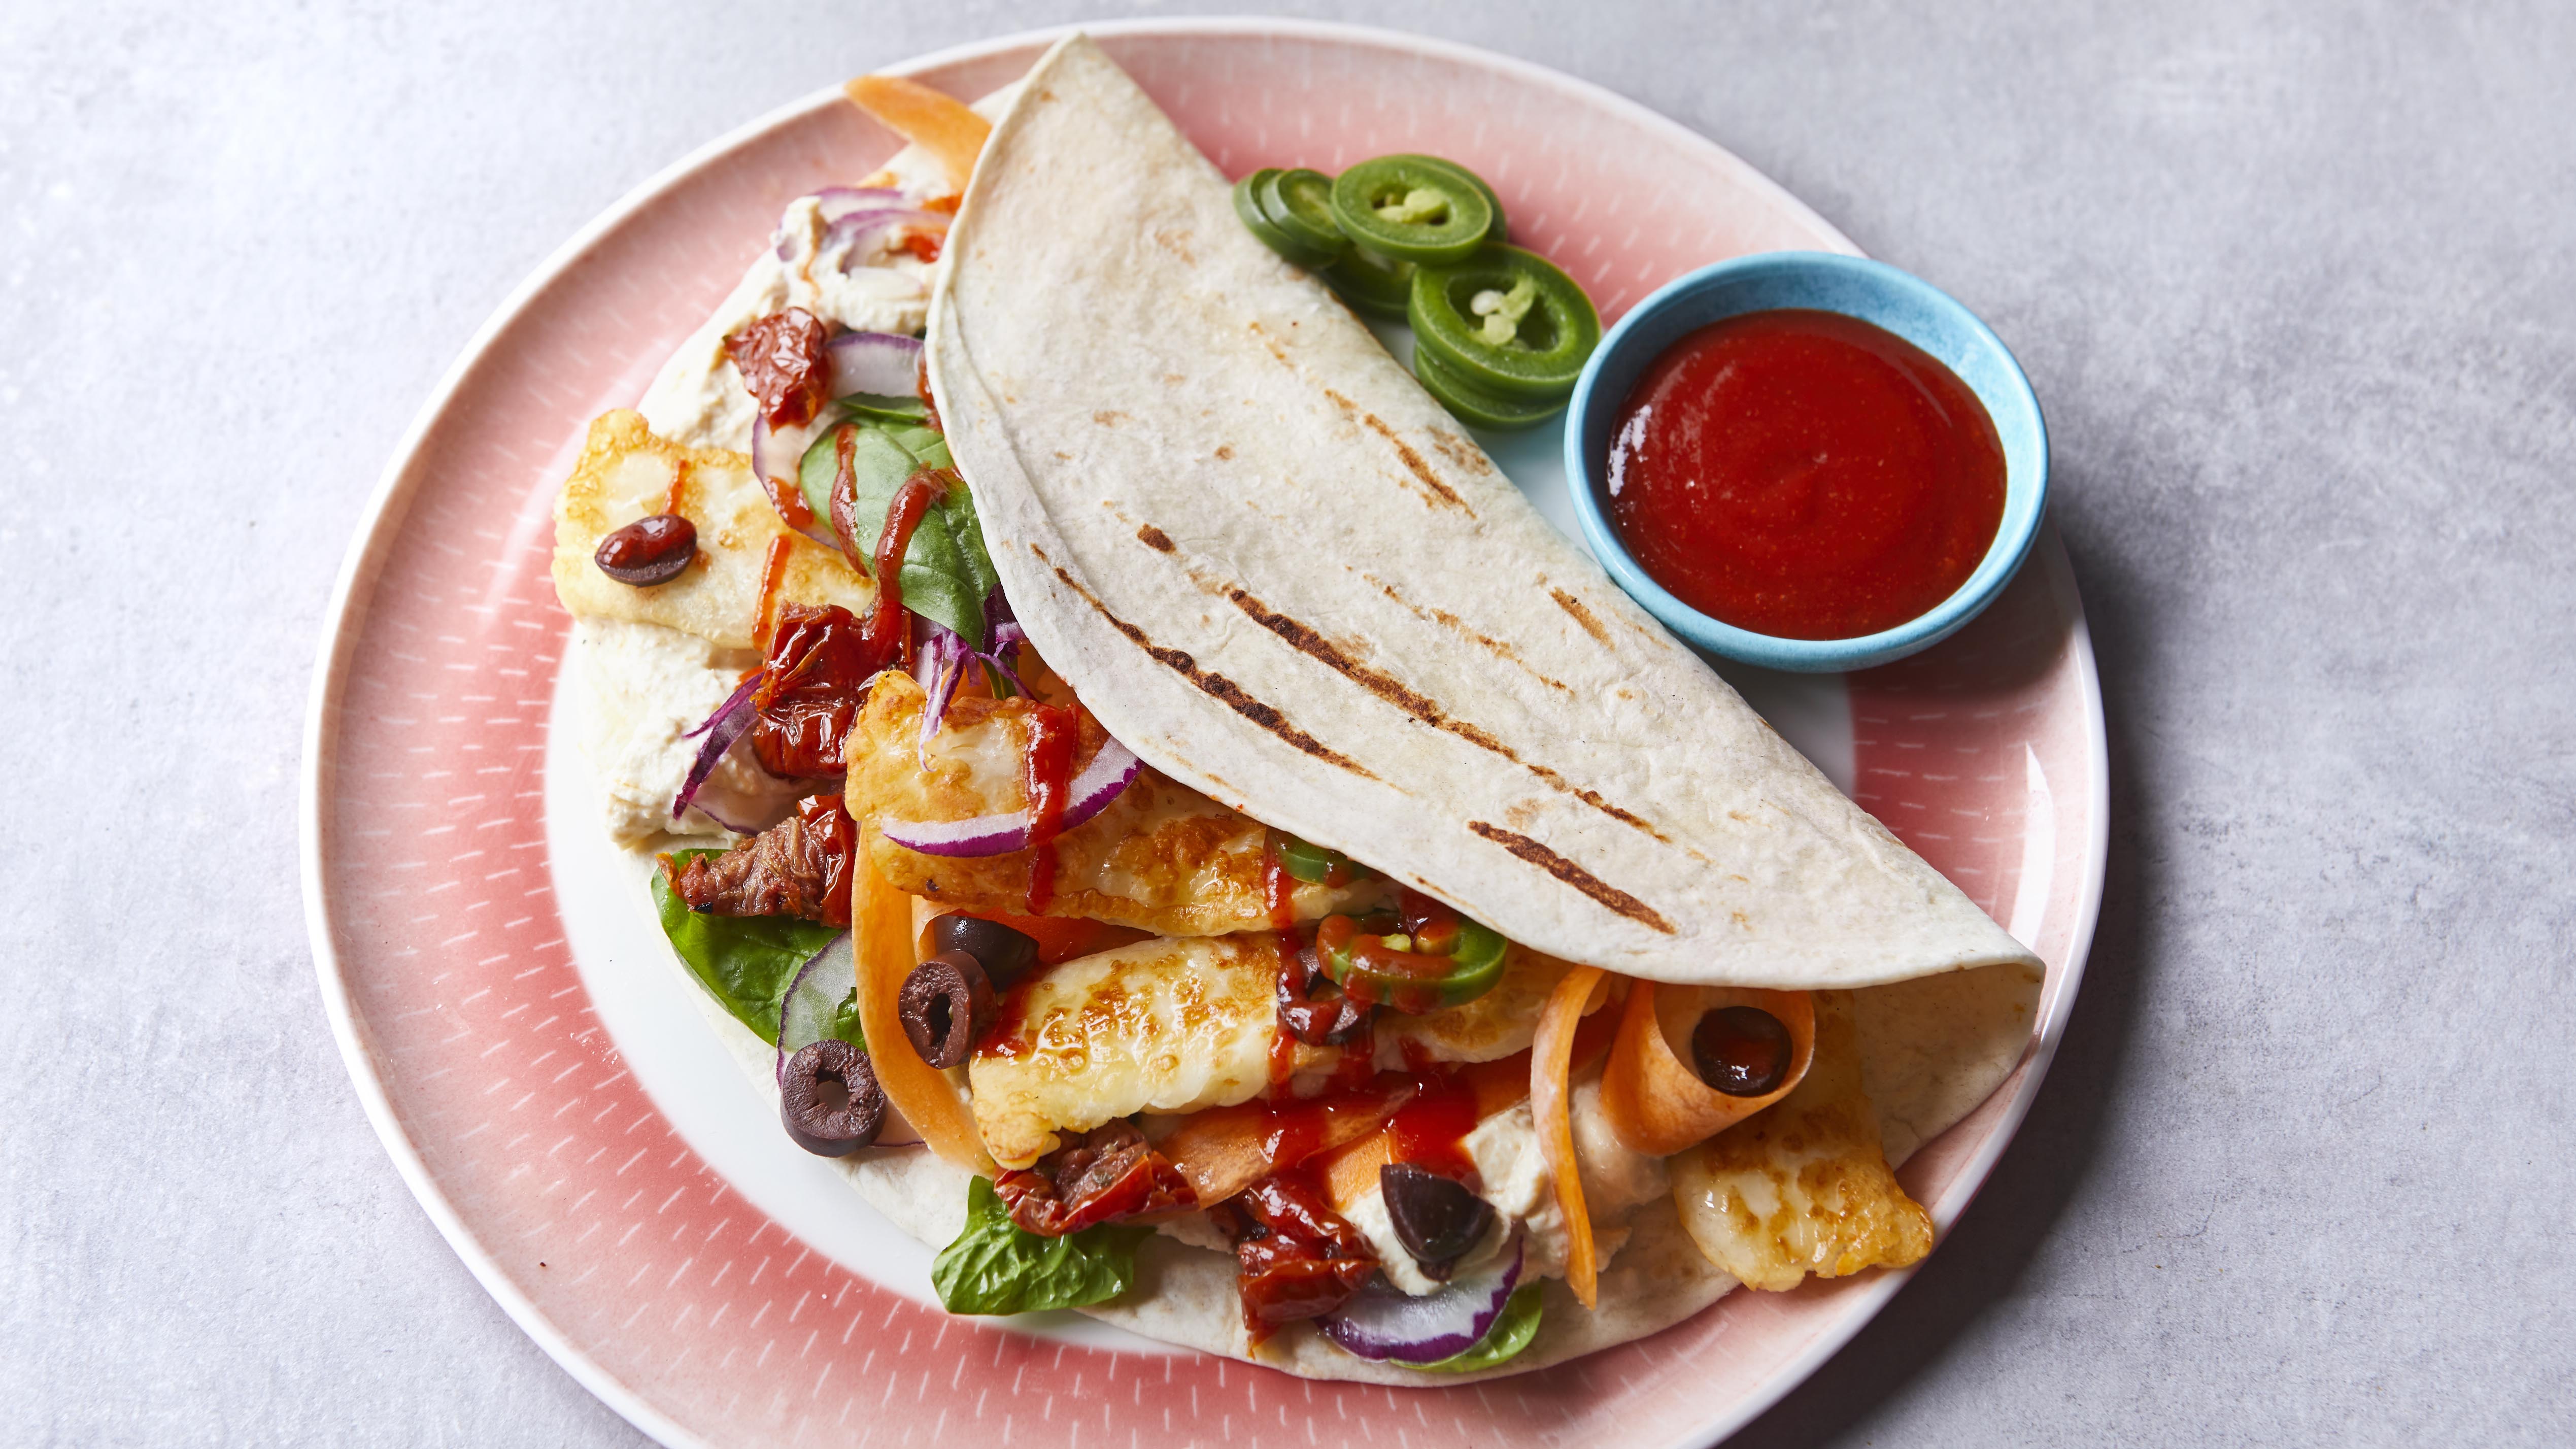 https://food-images.files.bbci.co.uk/food/recipes/easy_halloumi_wrap_57379_16x9.jpg